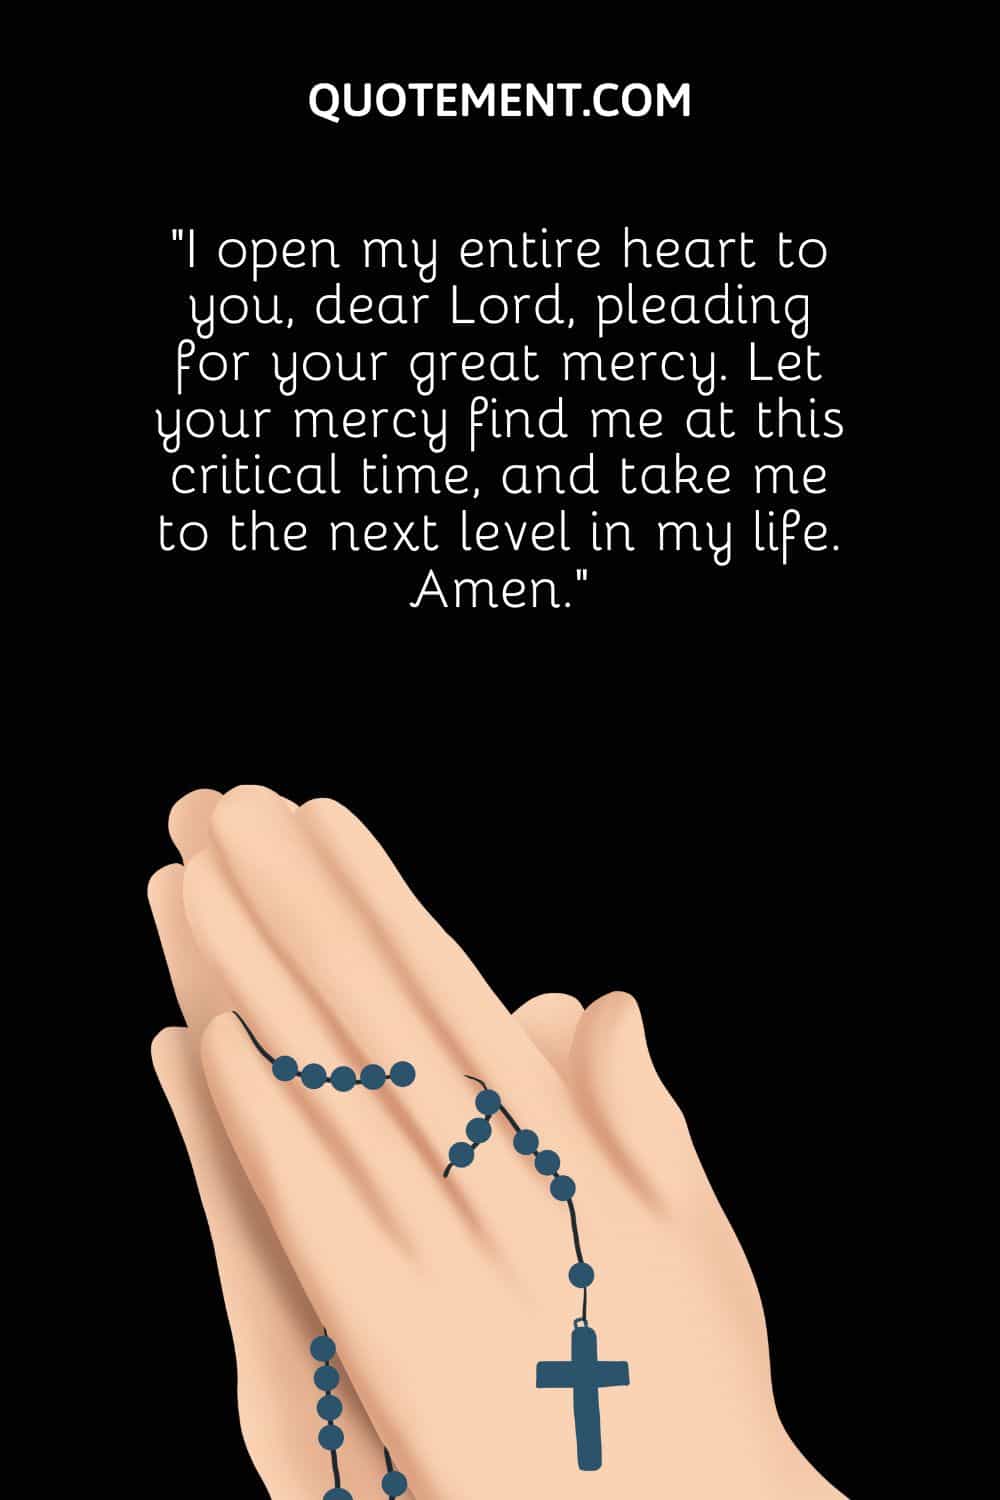 “I open my entire heart to you, dear Lord, pleading for your great mercy. Let your mercy find me at this critical time, and take me to the next level in my life. Amen.”